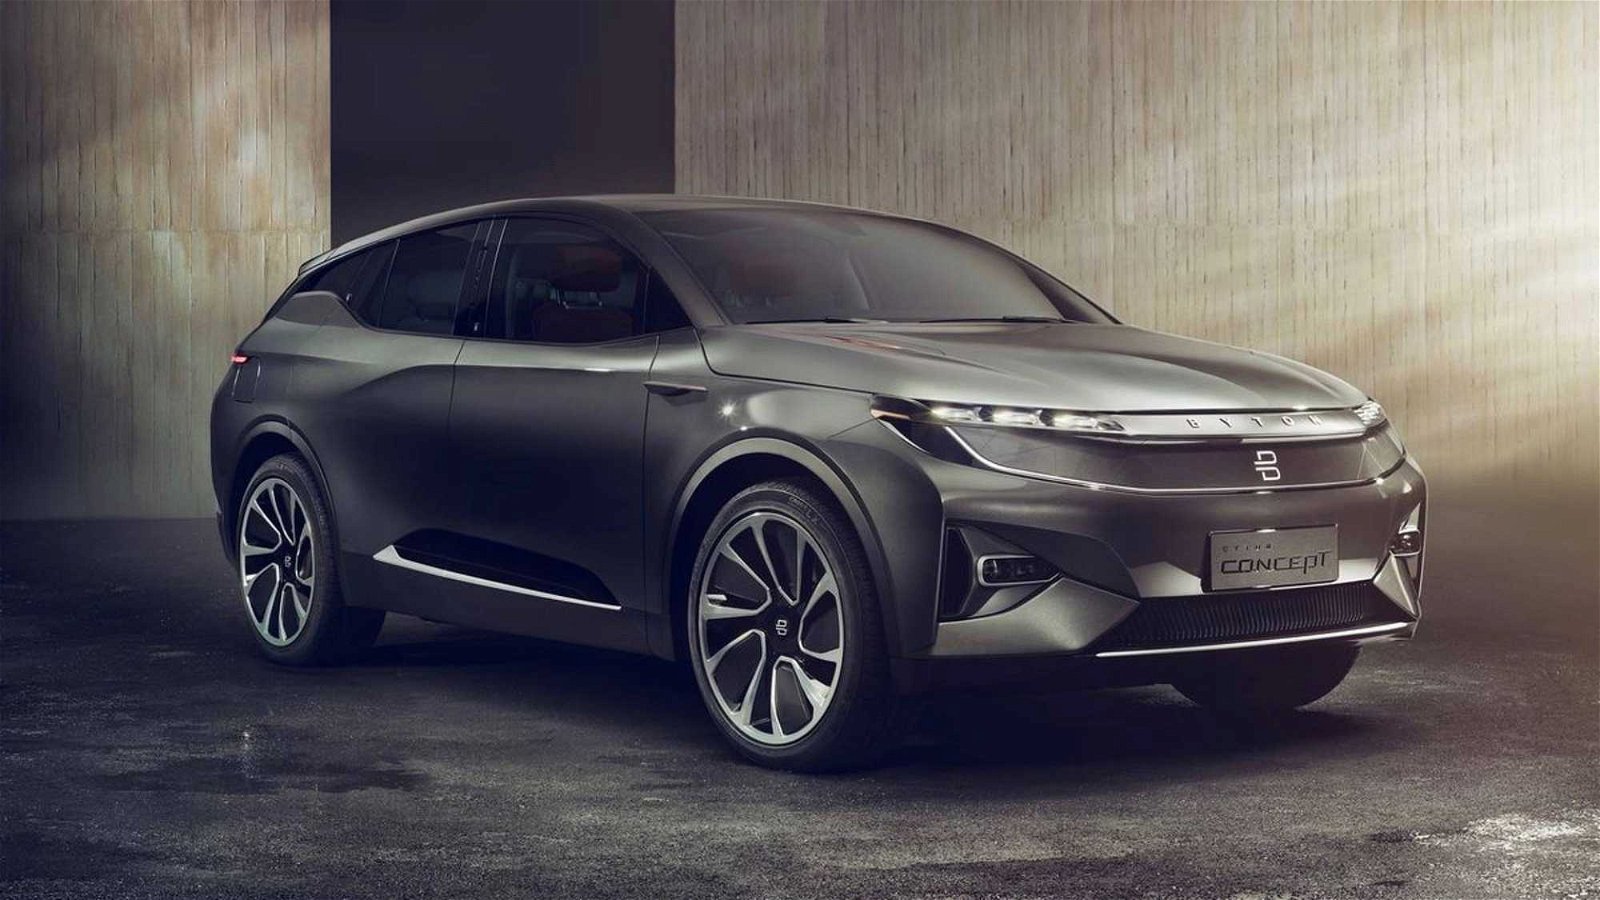 concept-byton-SUV-electric-13